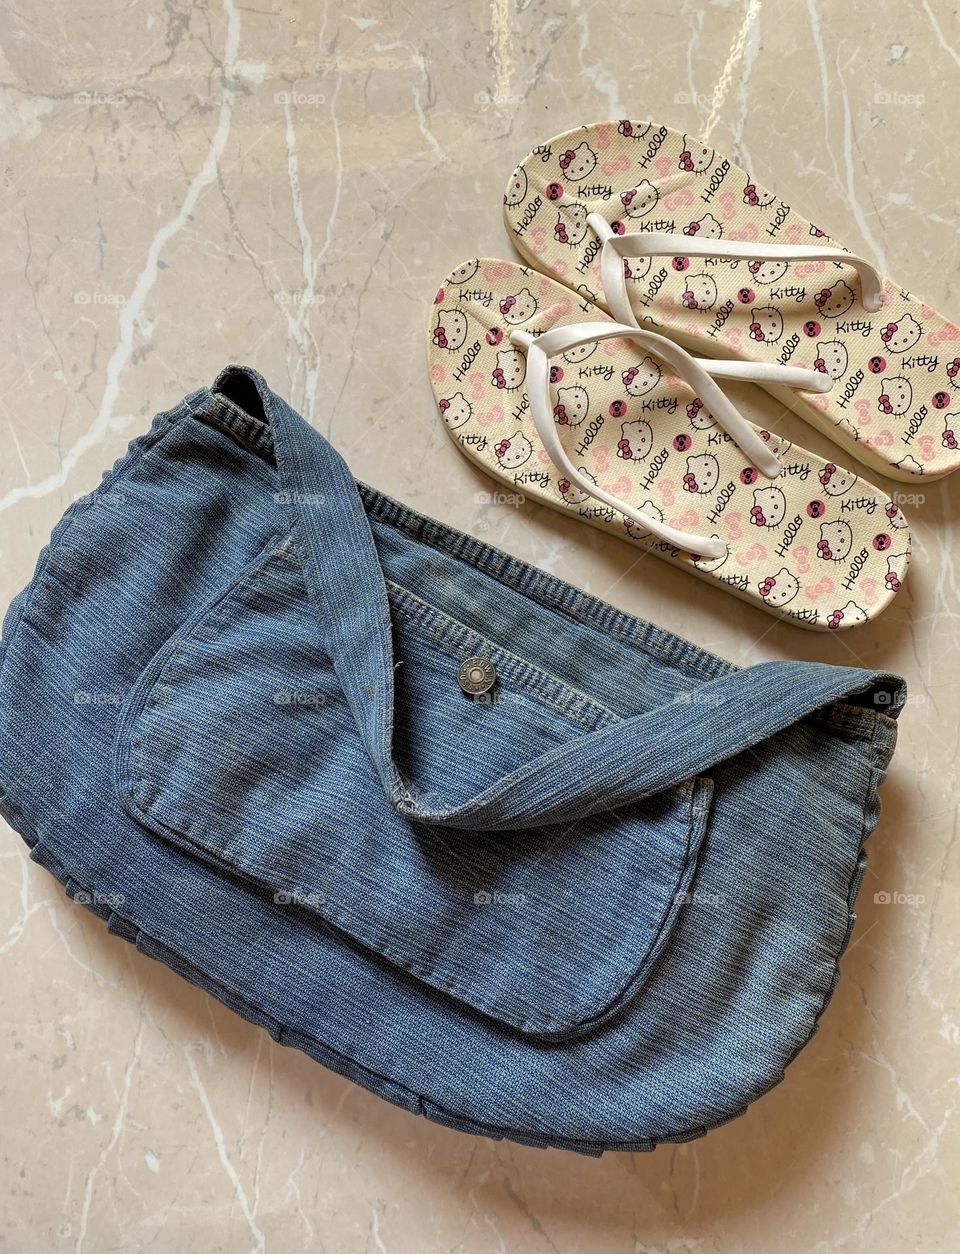 A handbag which I have made from an old trousers 